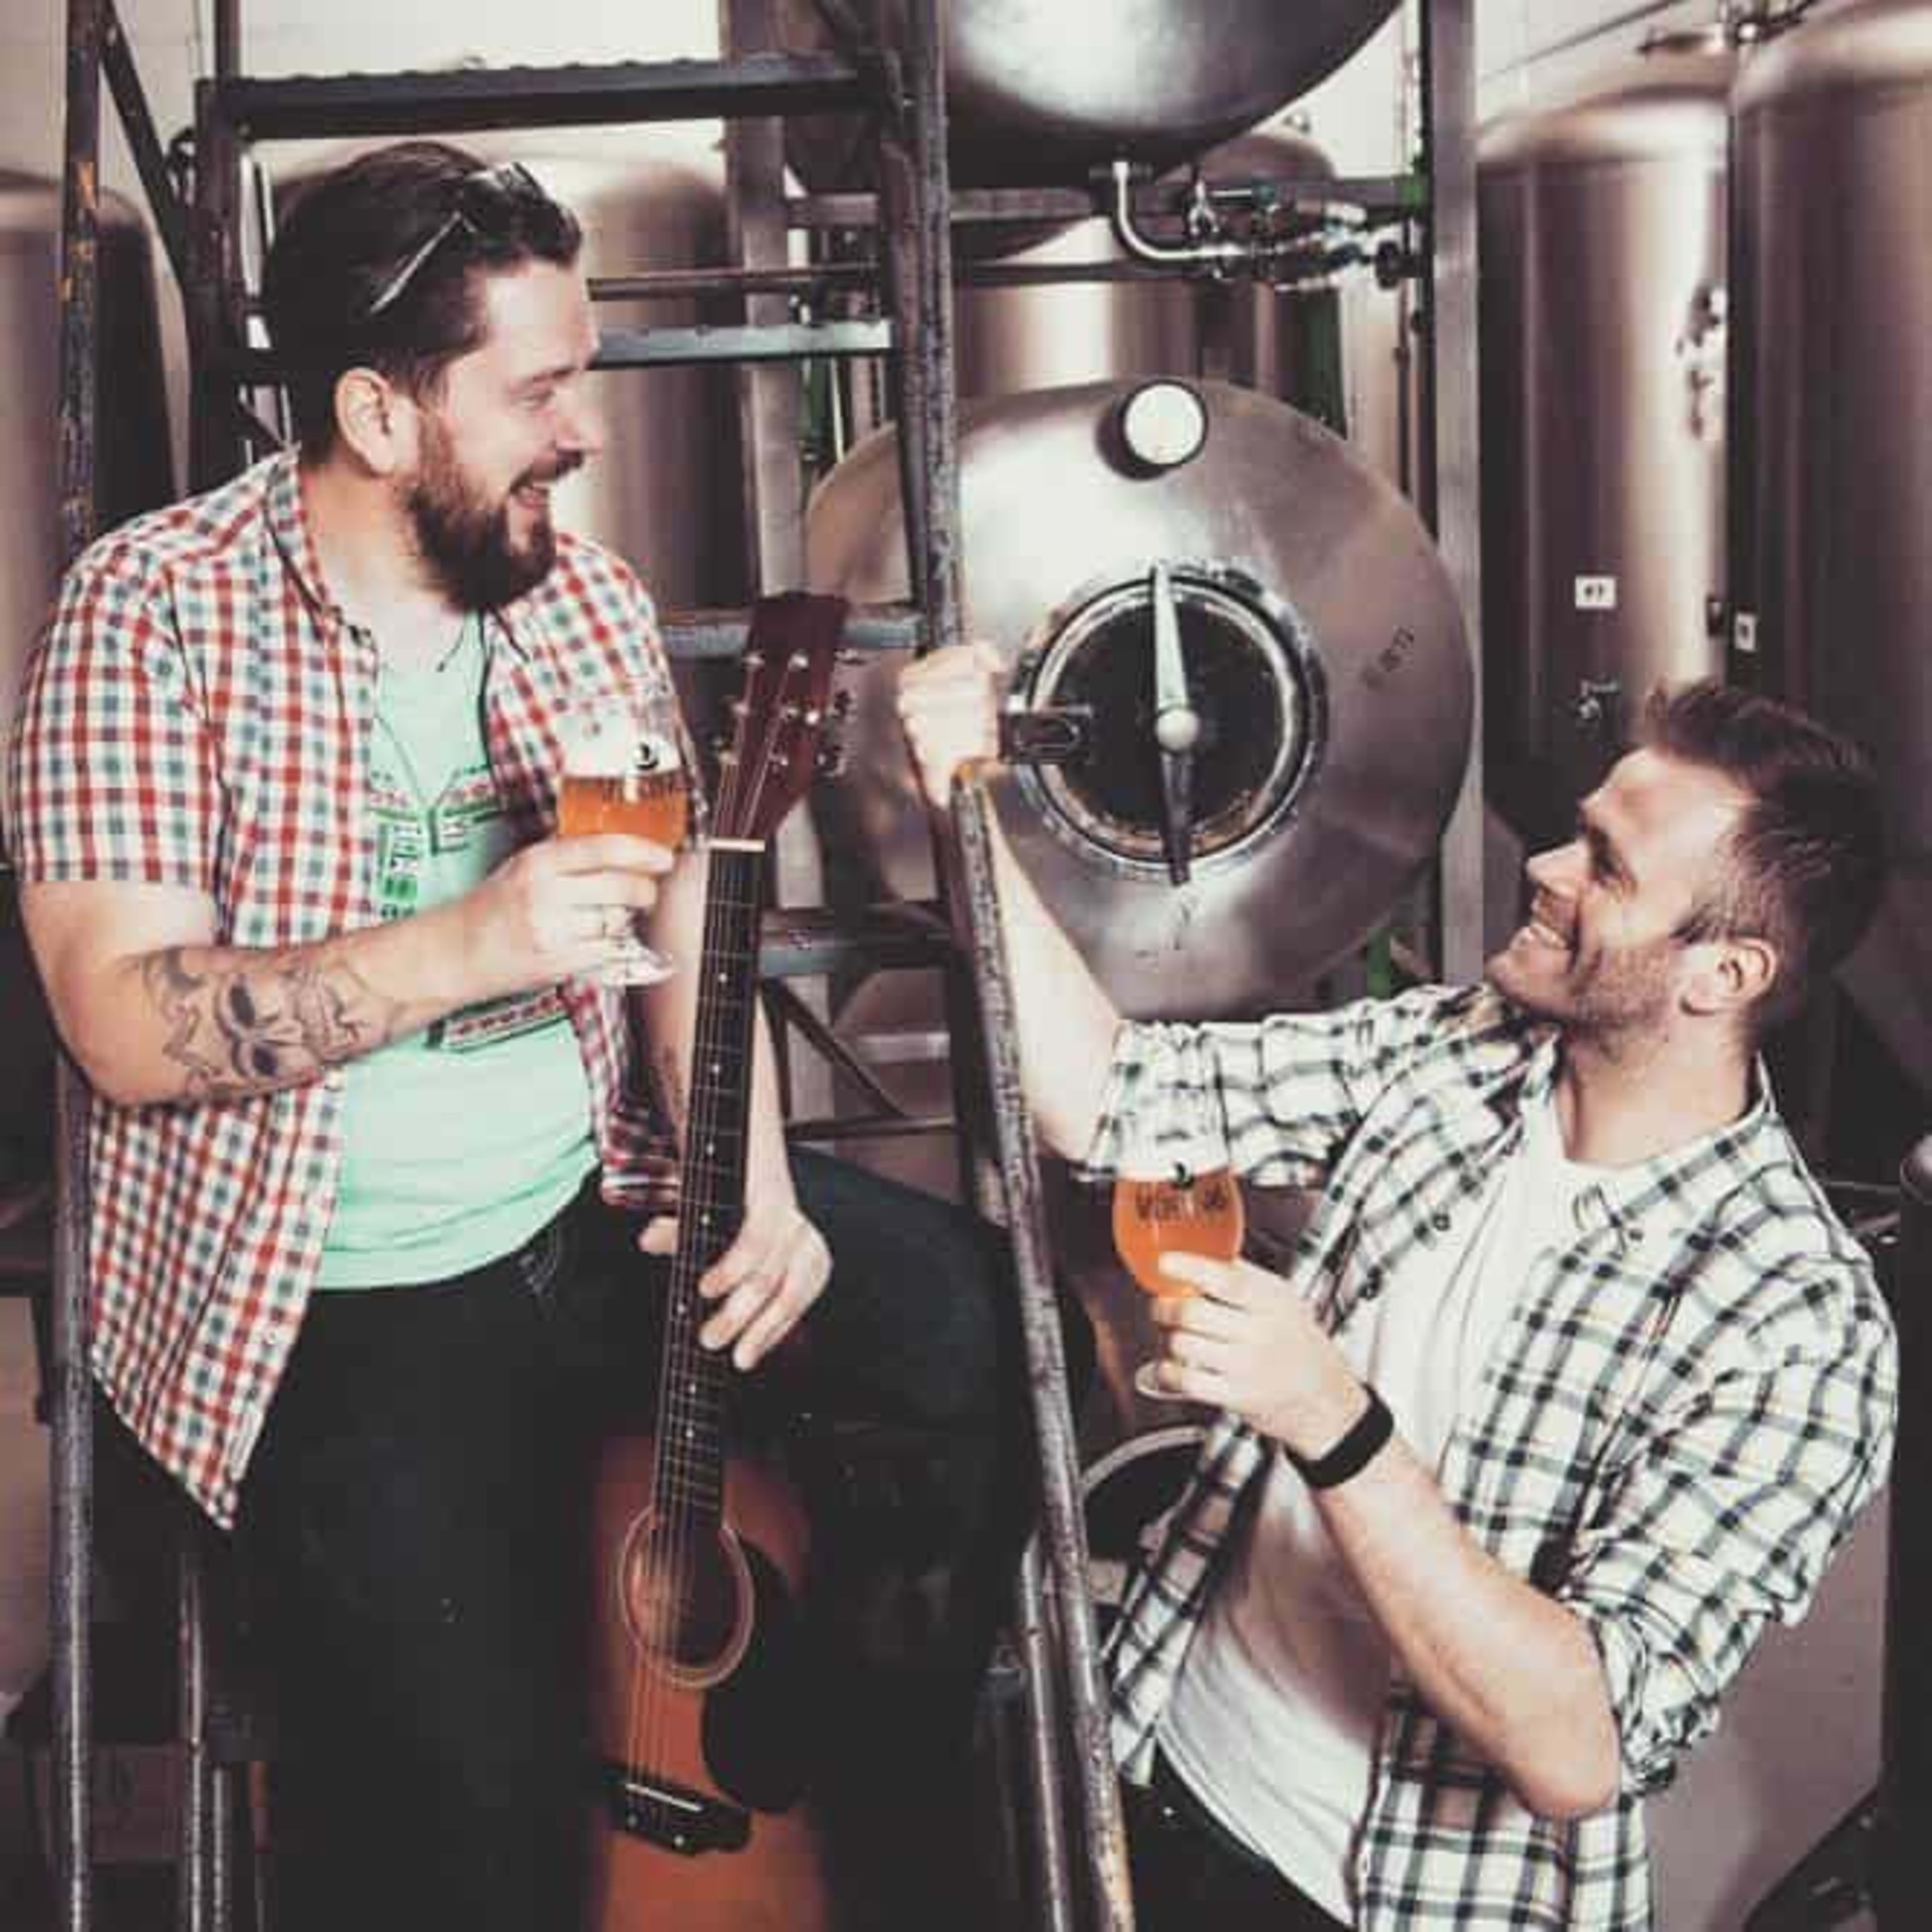 2 men with beer glasses in a brewery, one is holding a guitar